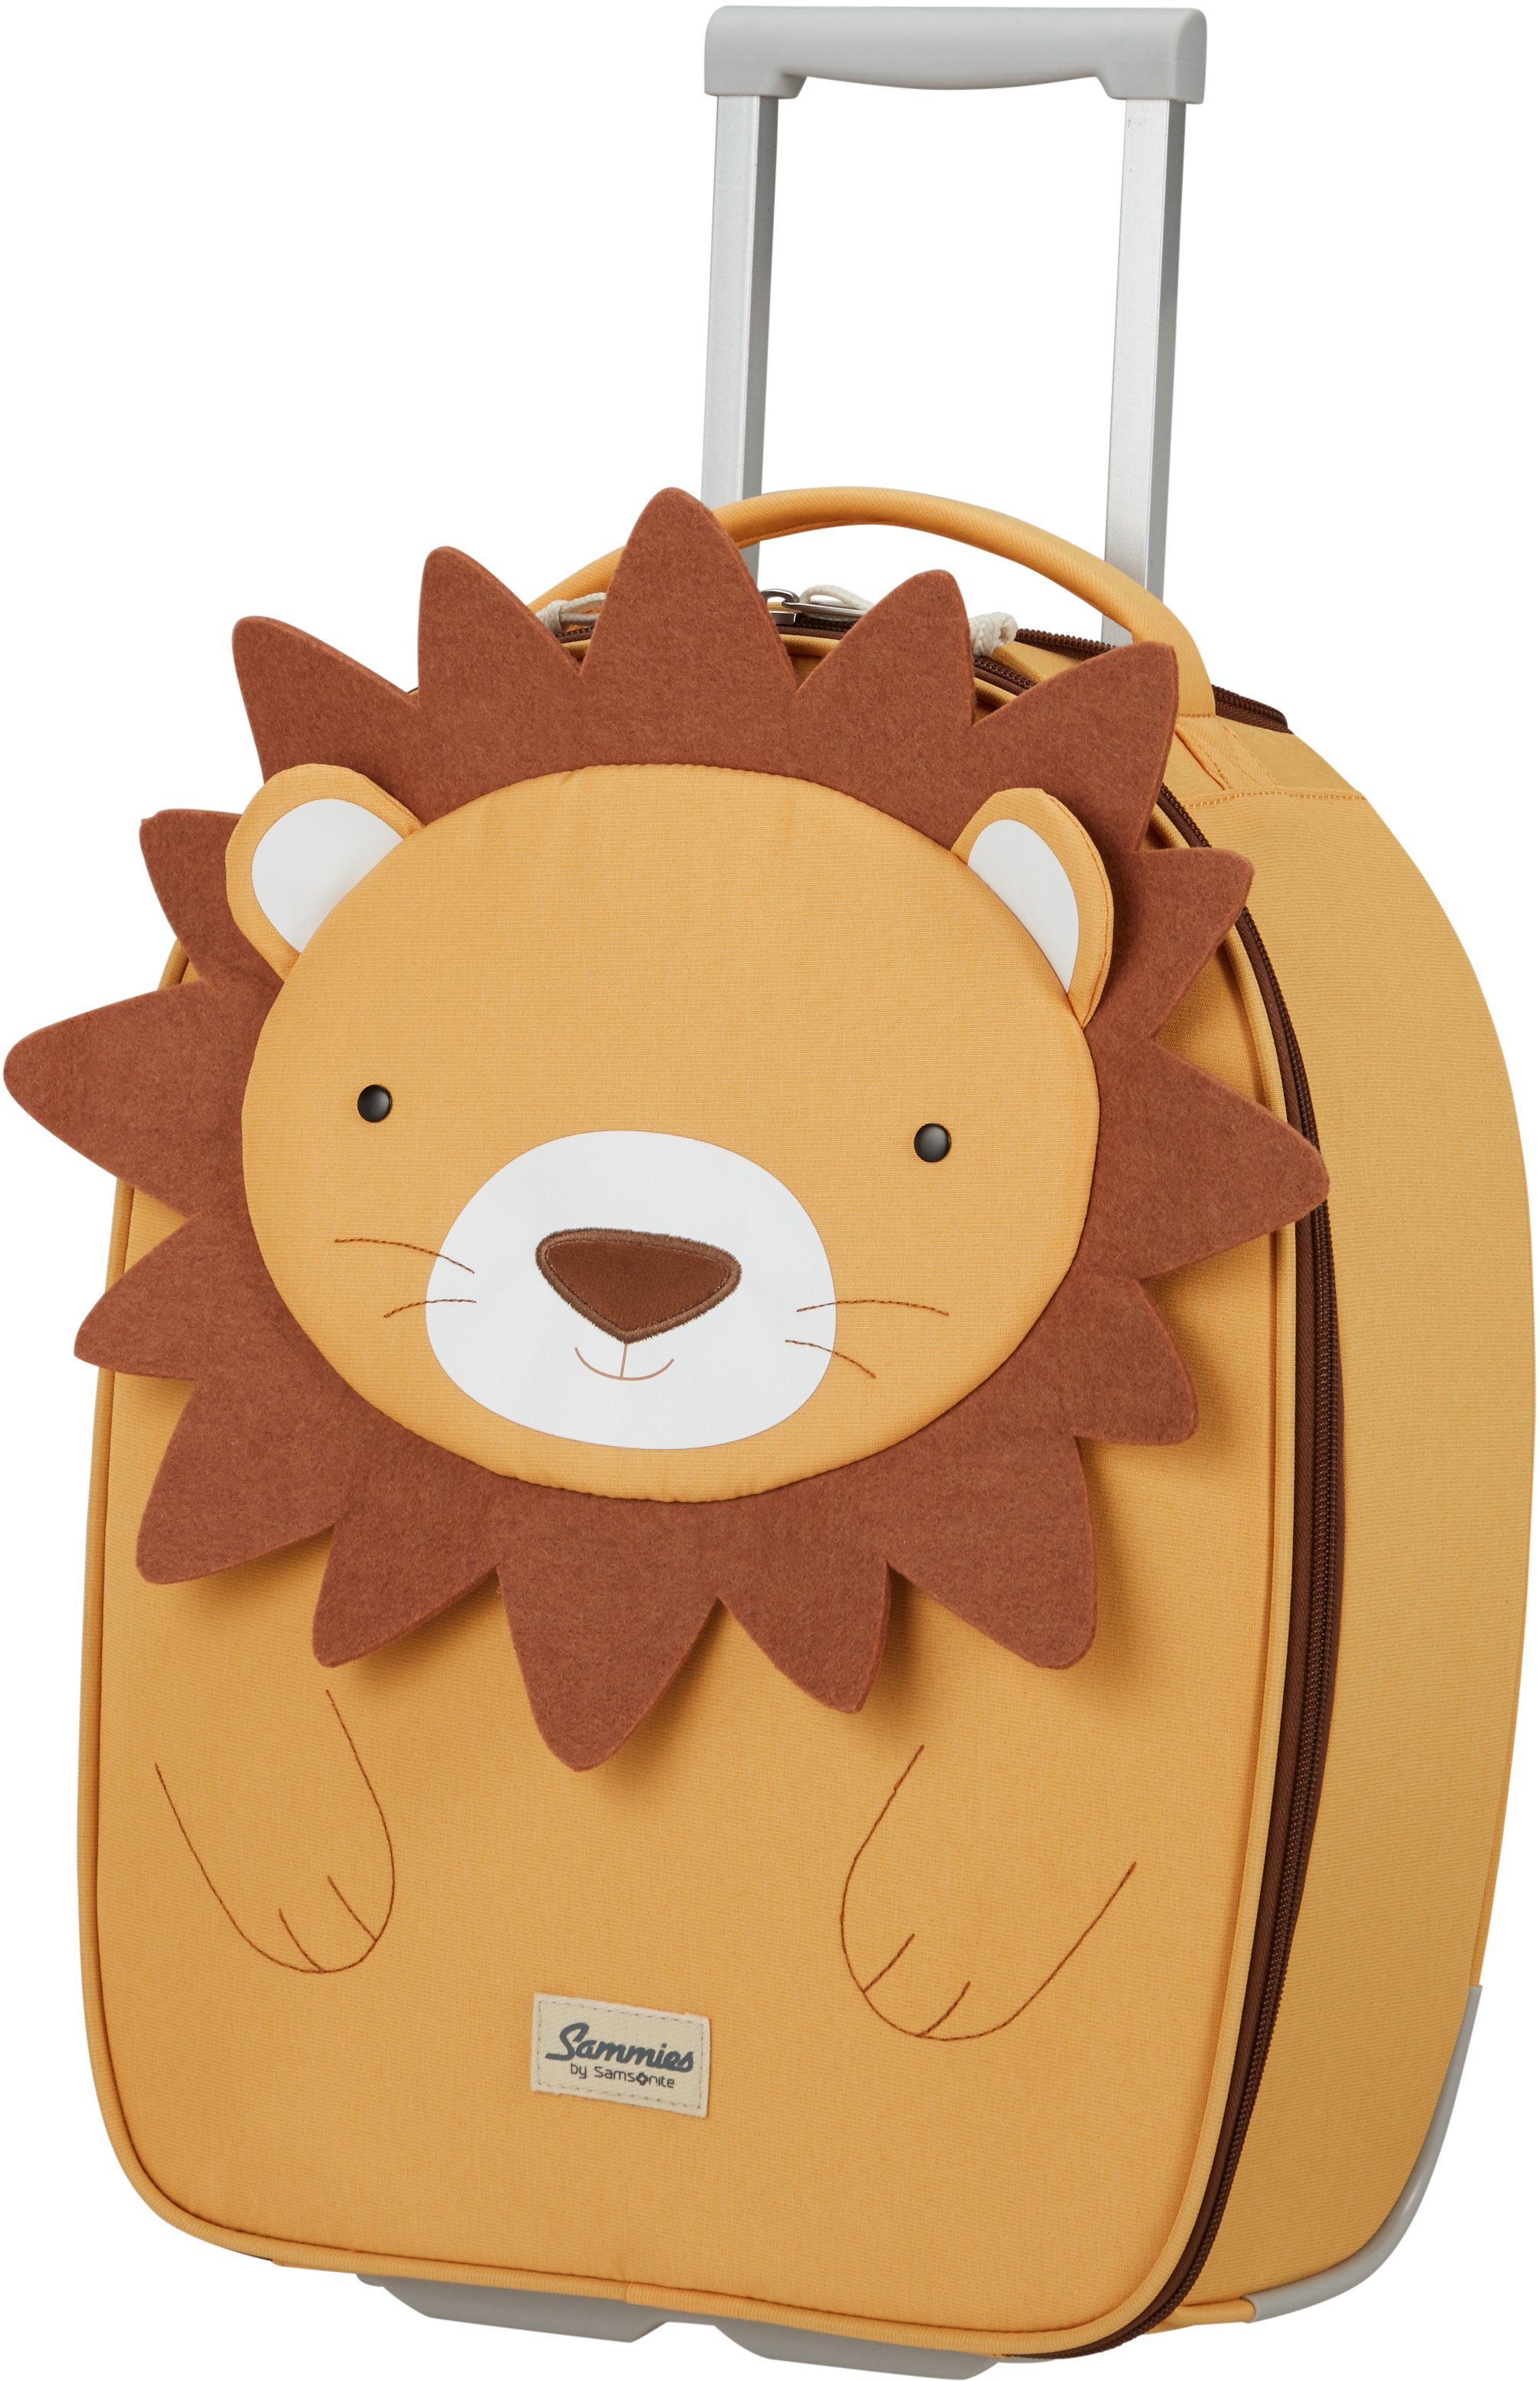 Sammies ECO, Lester, aus Kinderkoffer recyceltem Material Happy Samsonite Lion 2 Rollen,